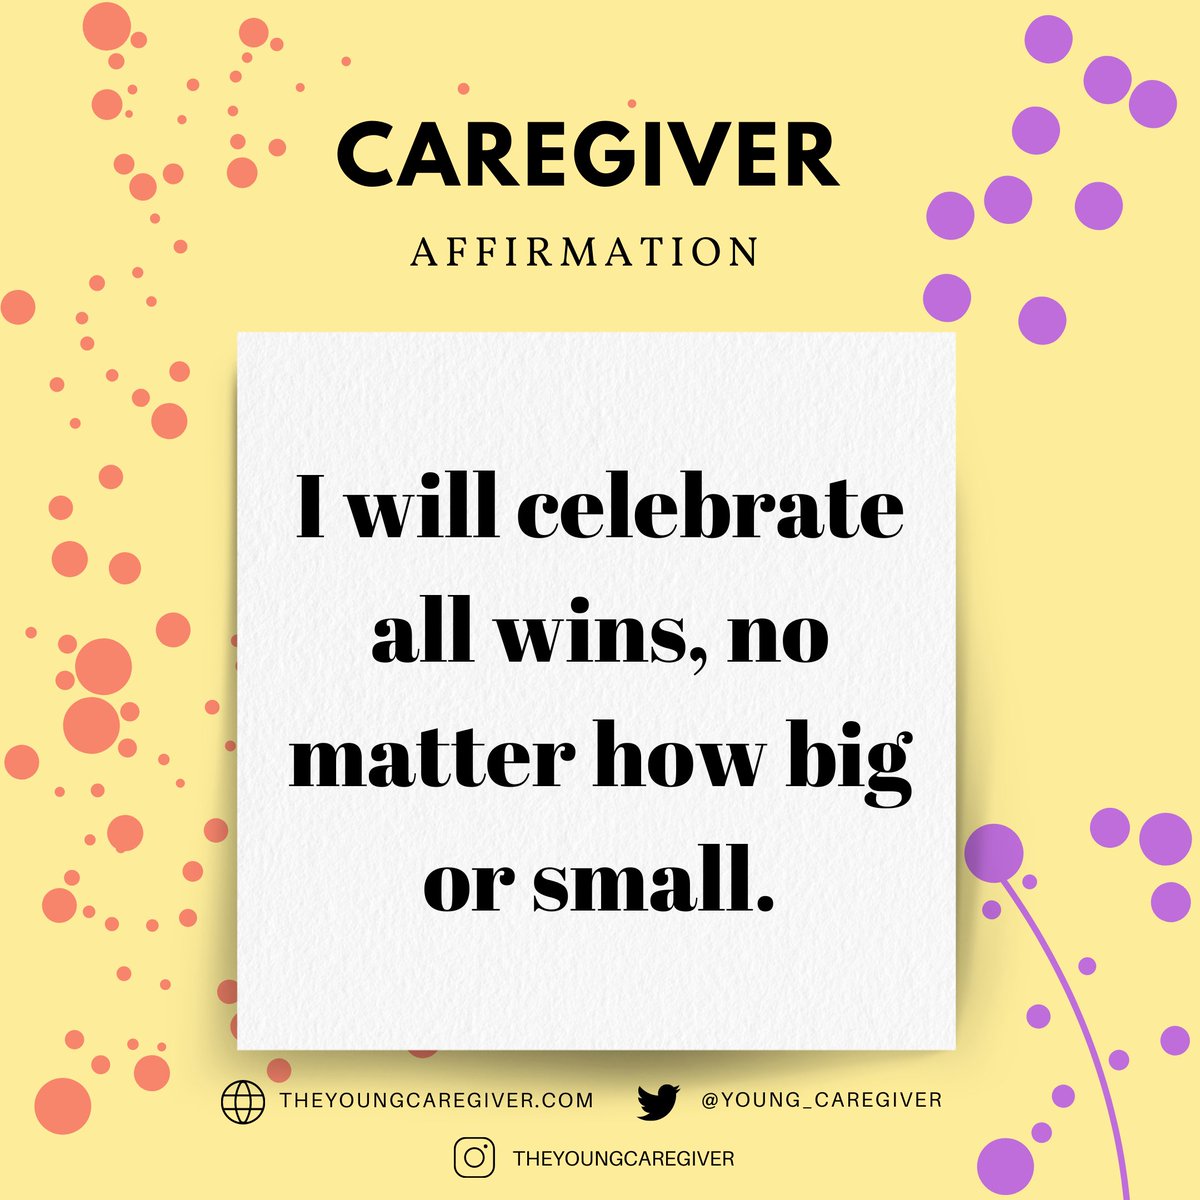 Celebrate your wins. A win can be bedtime happened an hour earlier, pat yourself on the back. I would get excited if I cooked enough food to last 3 days instead of 2. What was your last win? #theyoungcaregiver #caregiveraffirmations #selflove #selfcare #caregiver